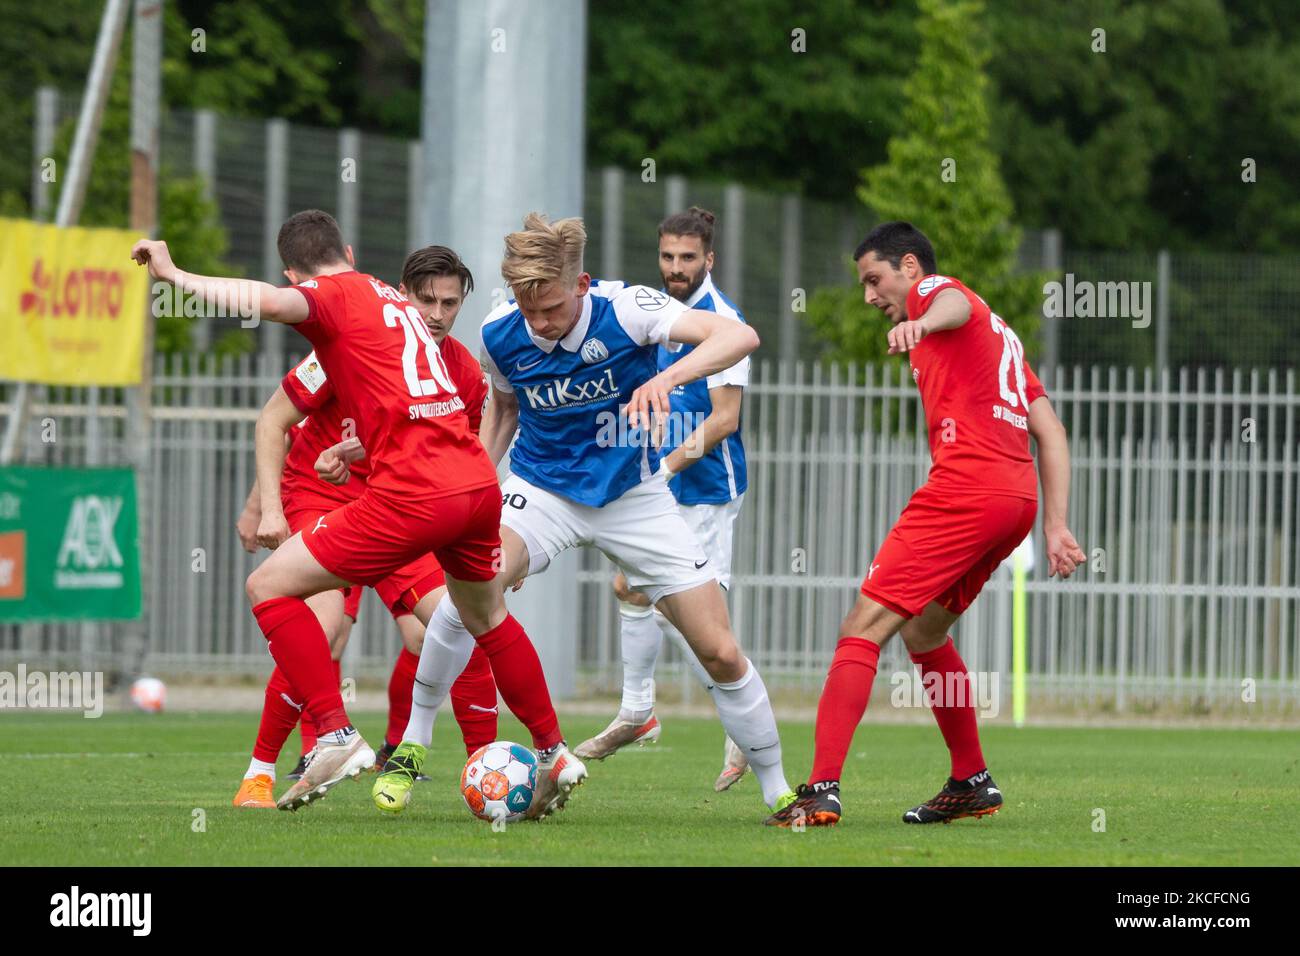 Christian Rusch (left) of Drochtersen/assel, Ted Tattermusch (middle) of SV Meppen and Oliver Ioannou of SV Drochtersen/Assel (right) battle for the ball during the lower saxony cup final between SV Drochtersen/Assel and SV Meppen at Eilenriedestadium on May 29, 2021 in Hanover, Germany. (Photo by Peter Niedung/NurPhoto) Stock Photo